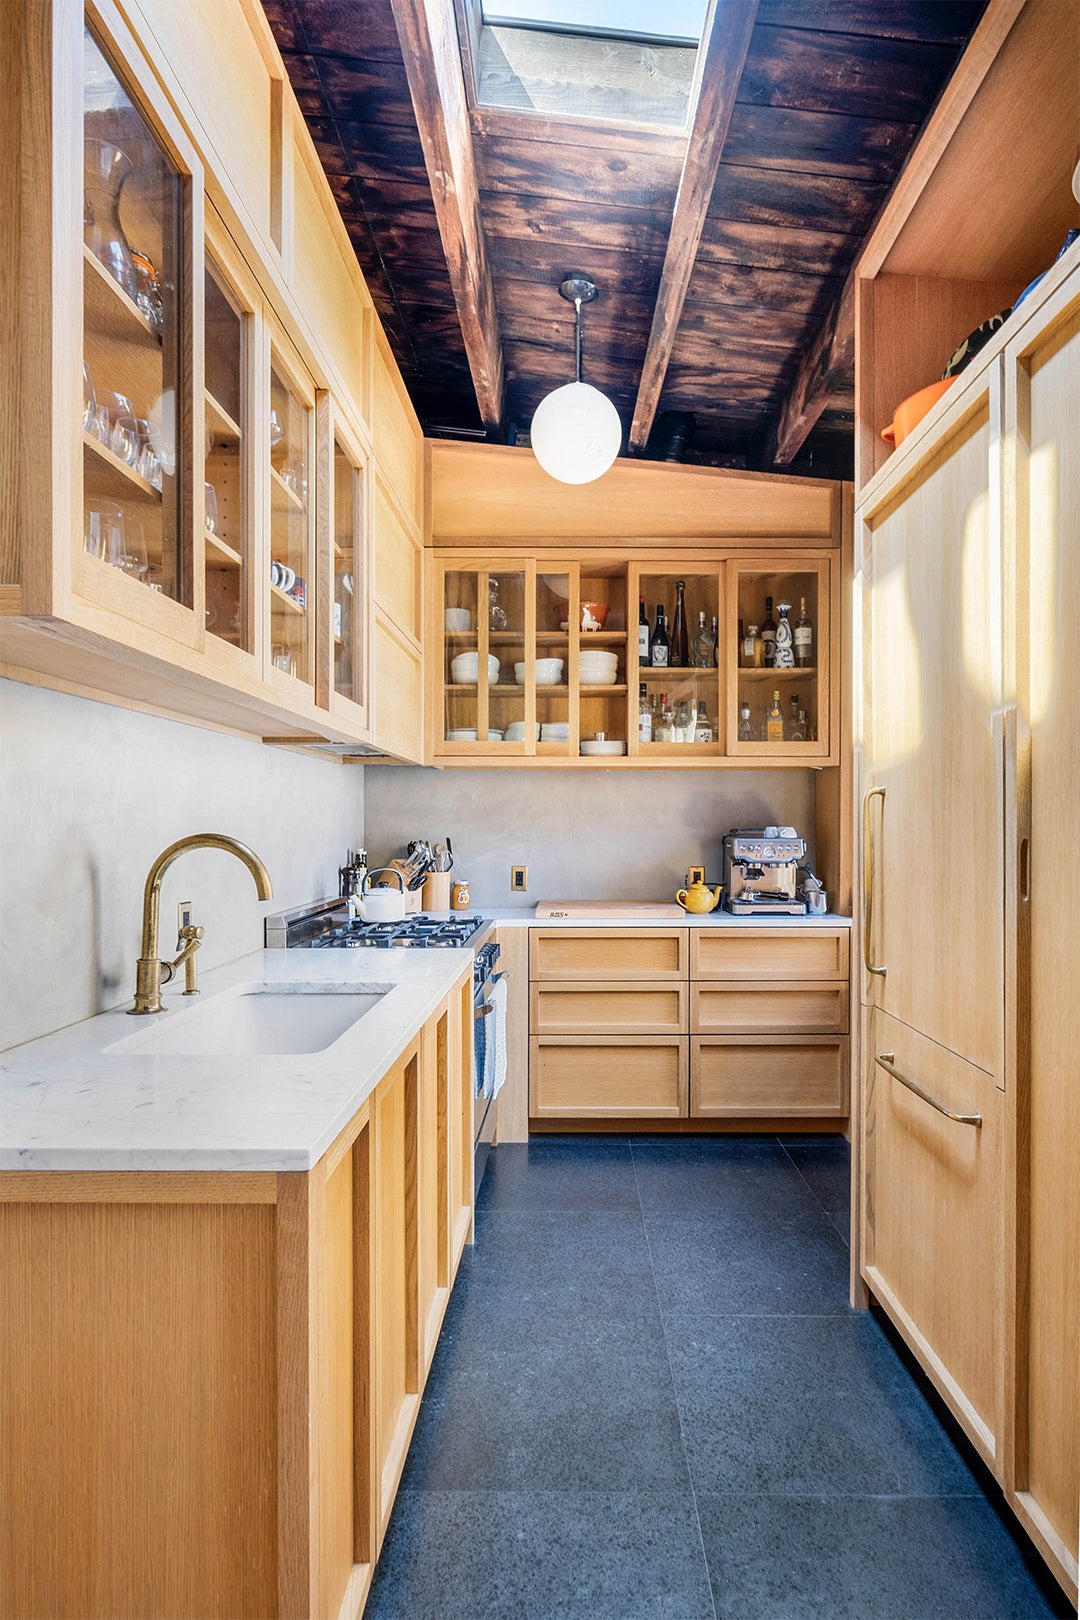 Actor Alexander Skarsgård’s Galley Kitchen Doesn’t Feel Small Thanks to This Cabinet Style